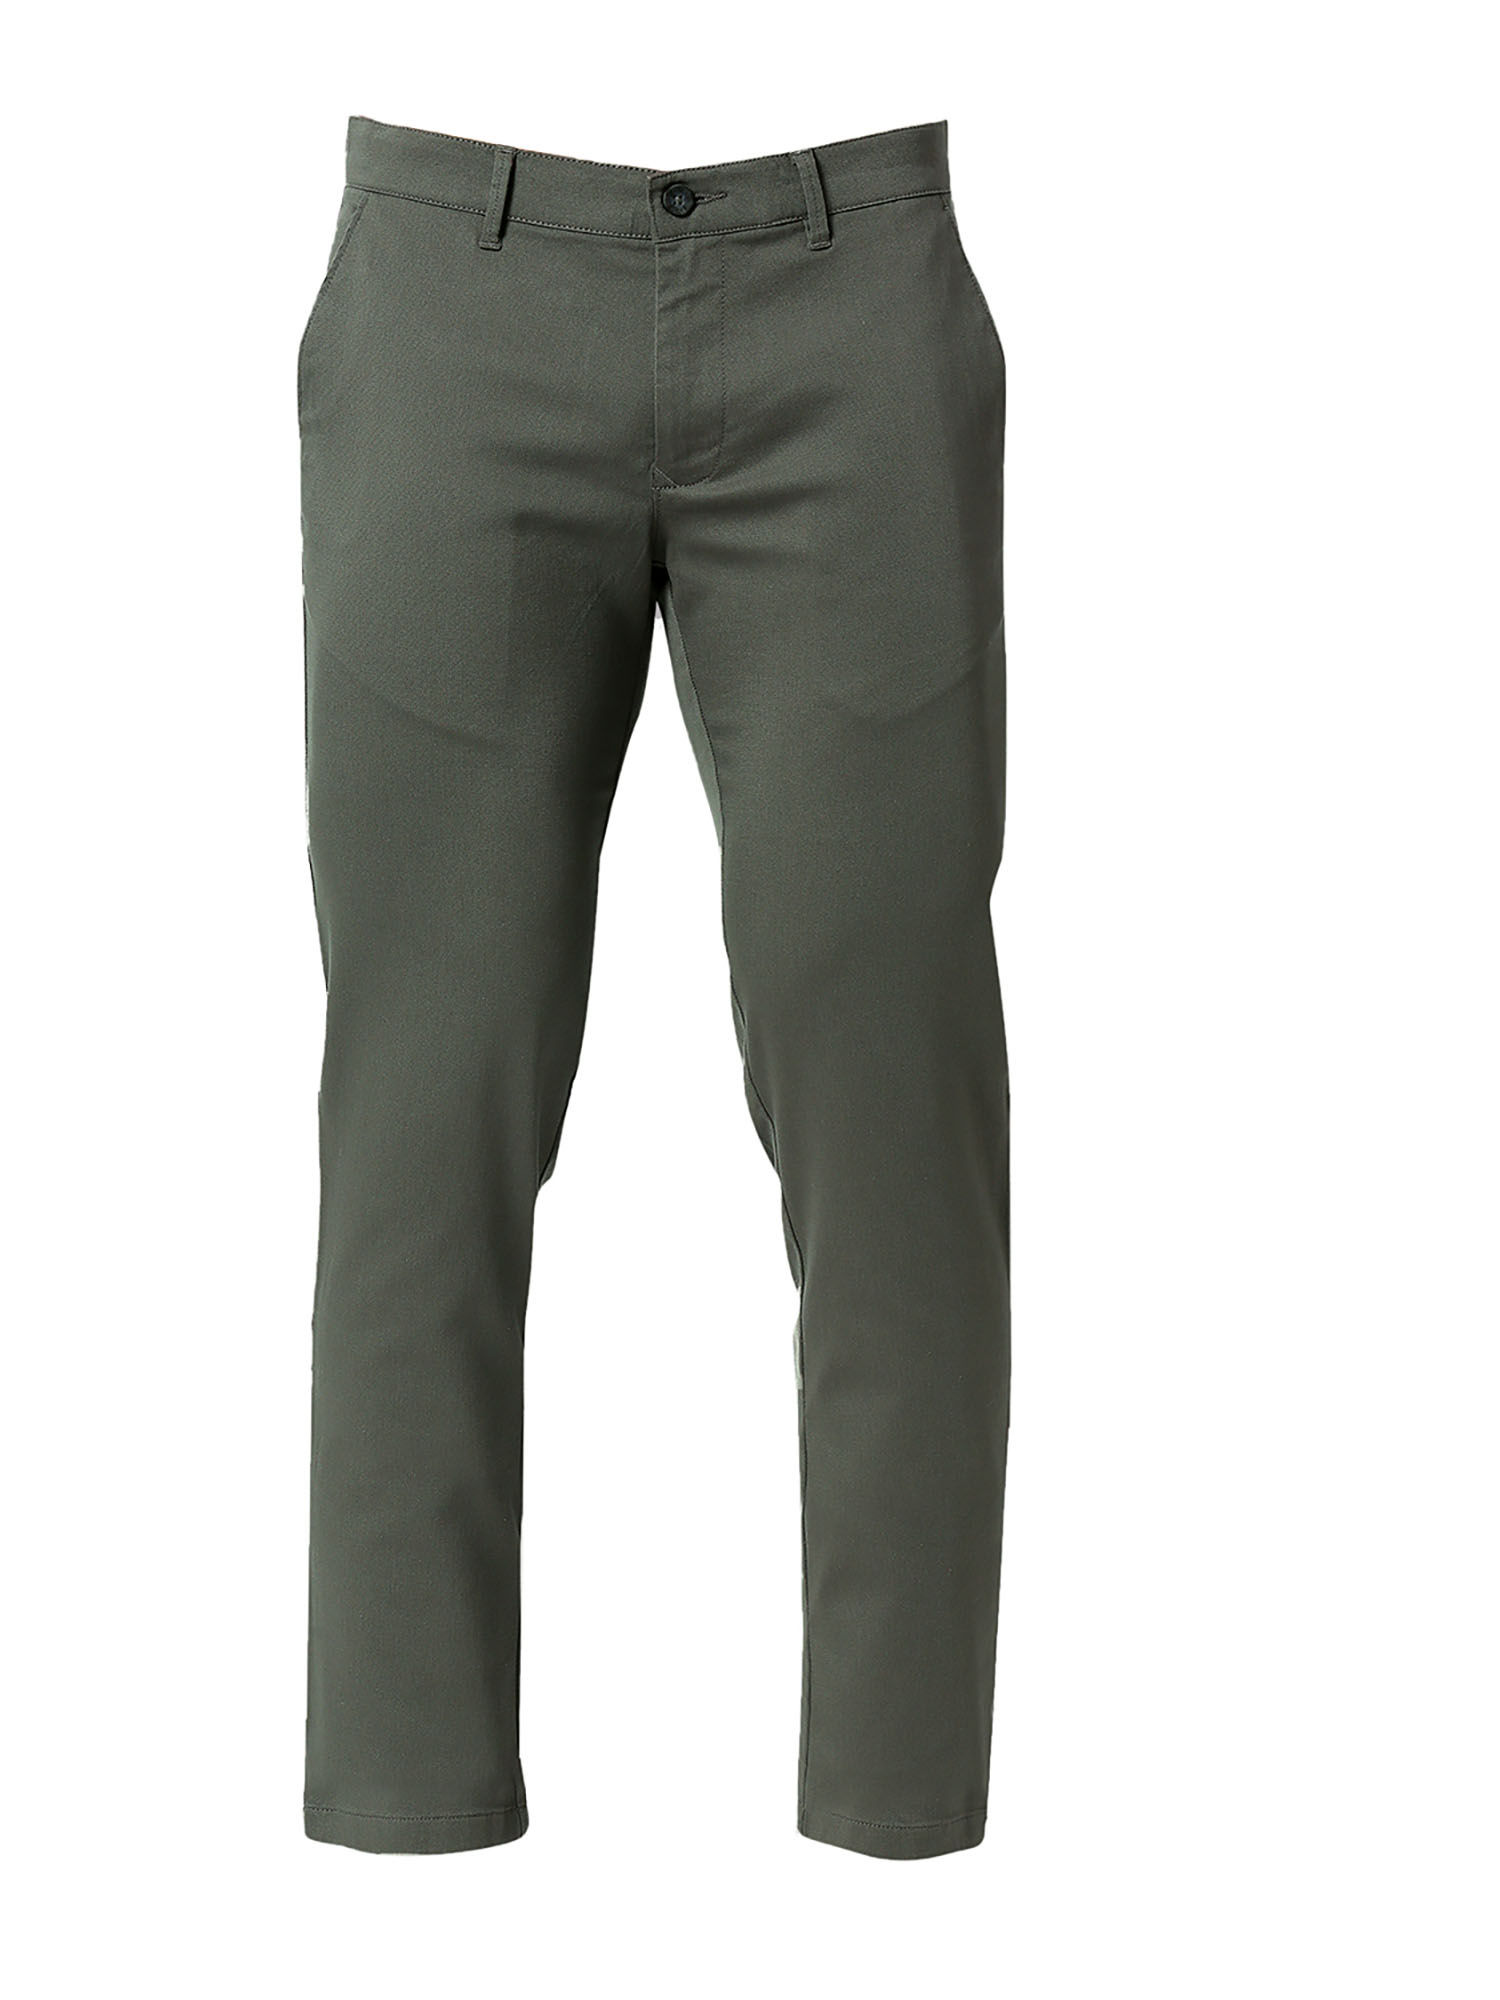 BASICS TAPERED FIT INCENSE KHAKI COTTON STRETCH TROUSERS-23BTR52945